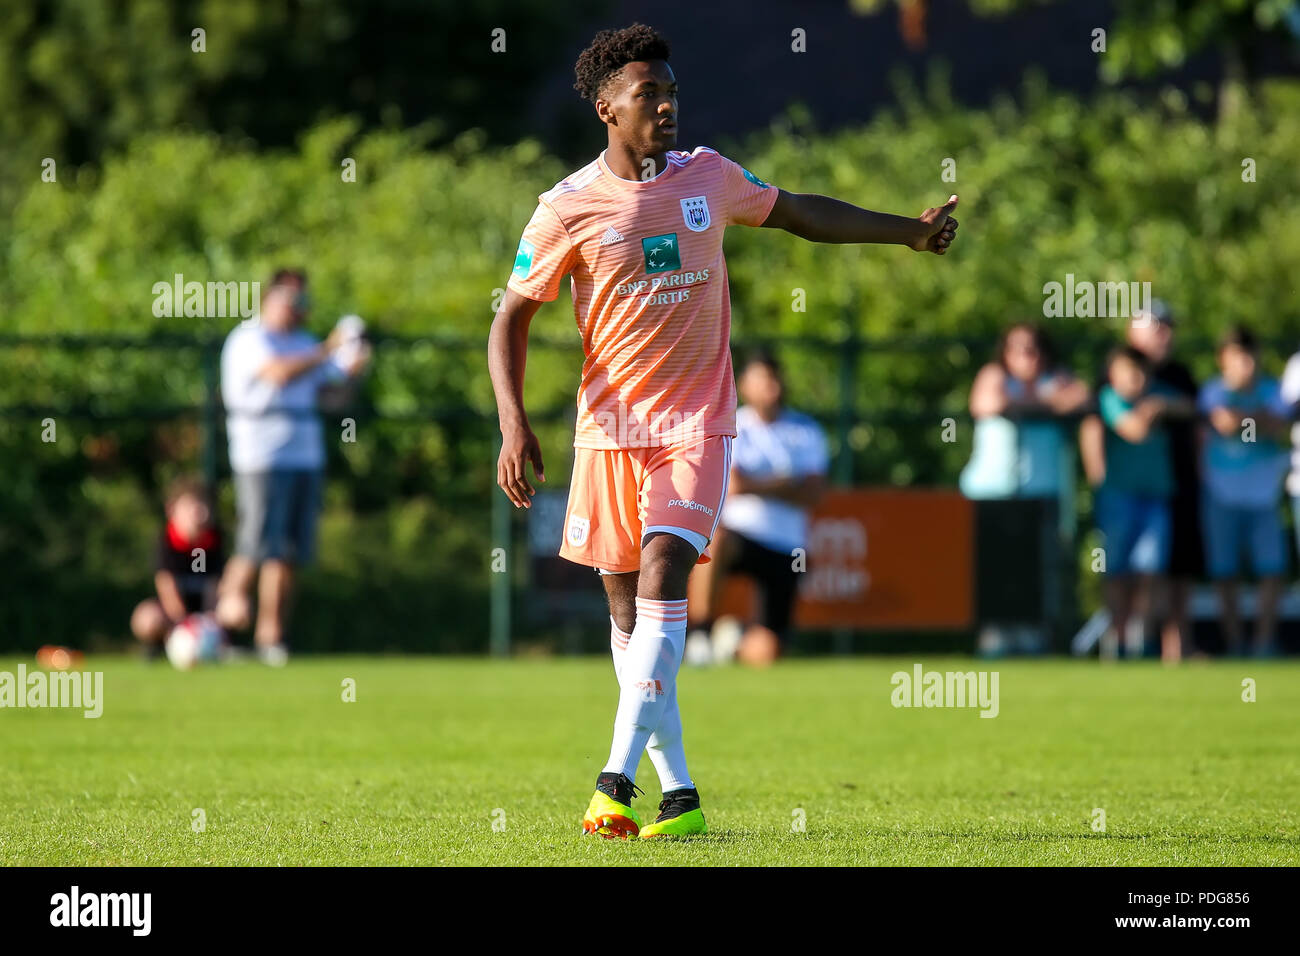 Horst, Netherlands - June 29, 2018: Player of RSC Anderlecht Abdoul Dante in action during friendly match RSC Anderlecht vs PAOK at Sport park Sportin Stock Photo